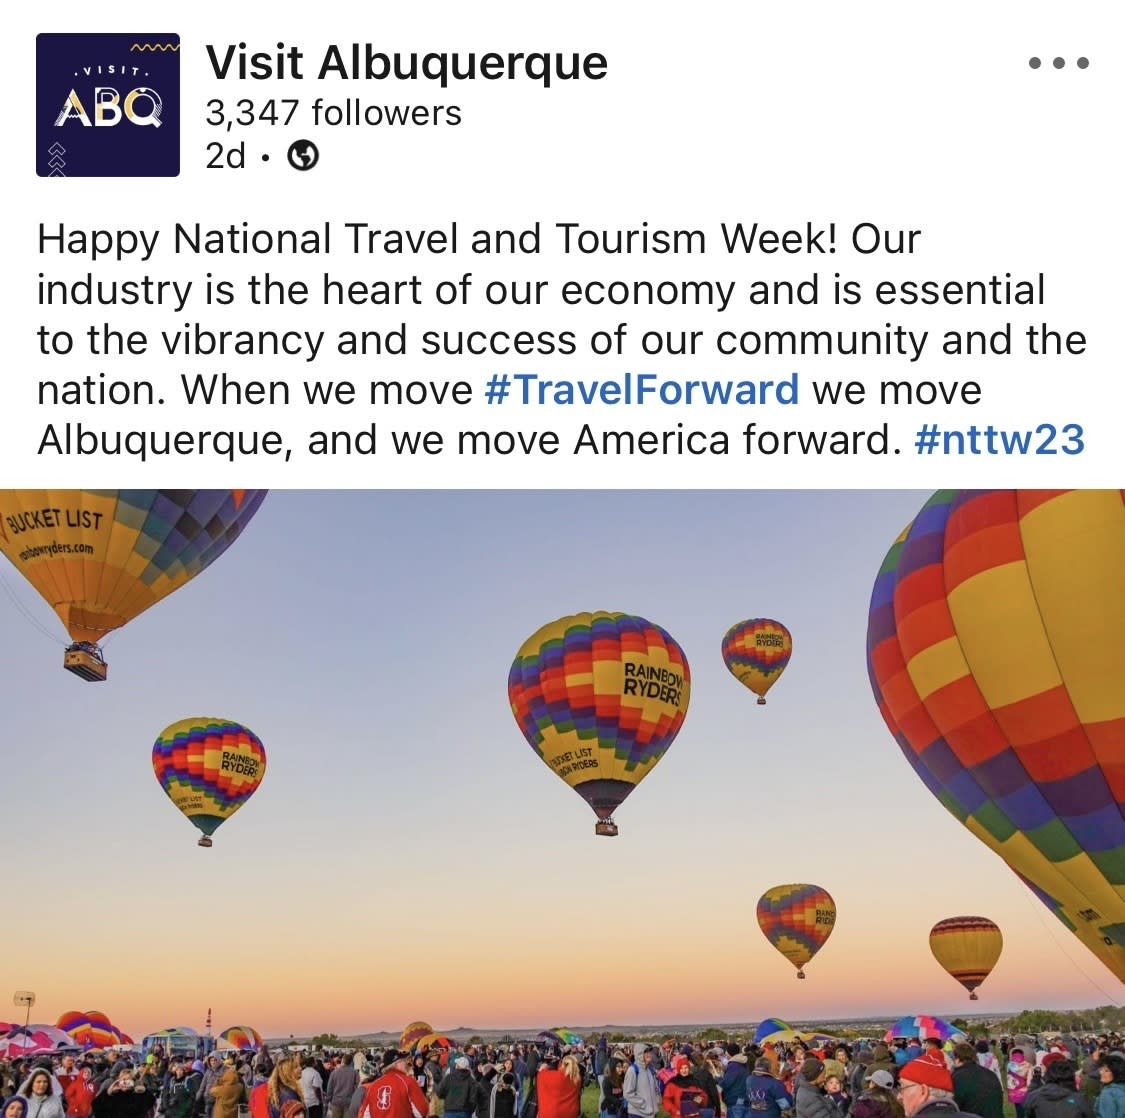 A look at the National Travel and Tourism post Visit Albuquerque made on LinkedIn